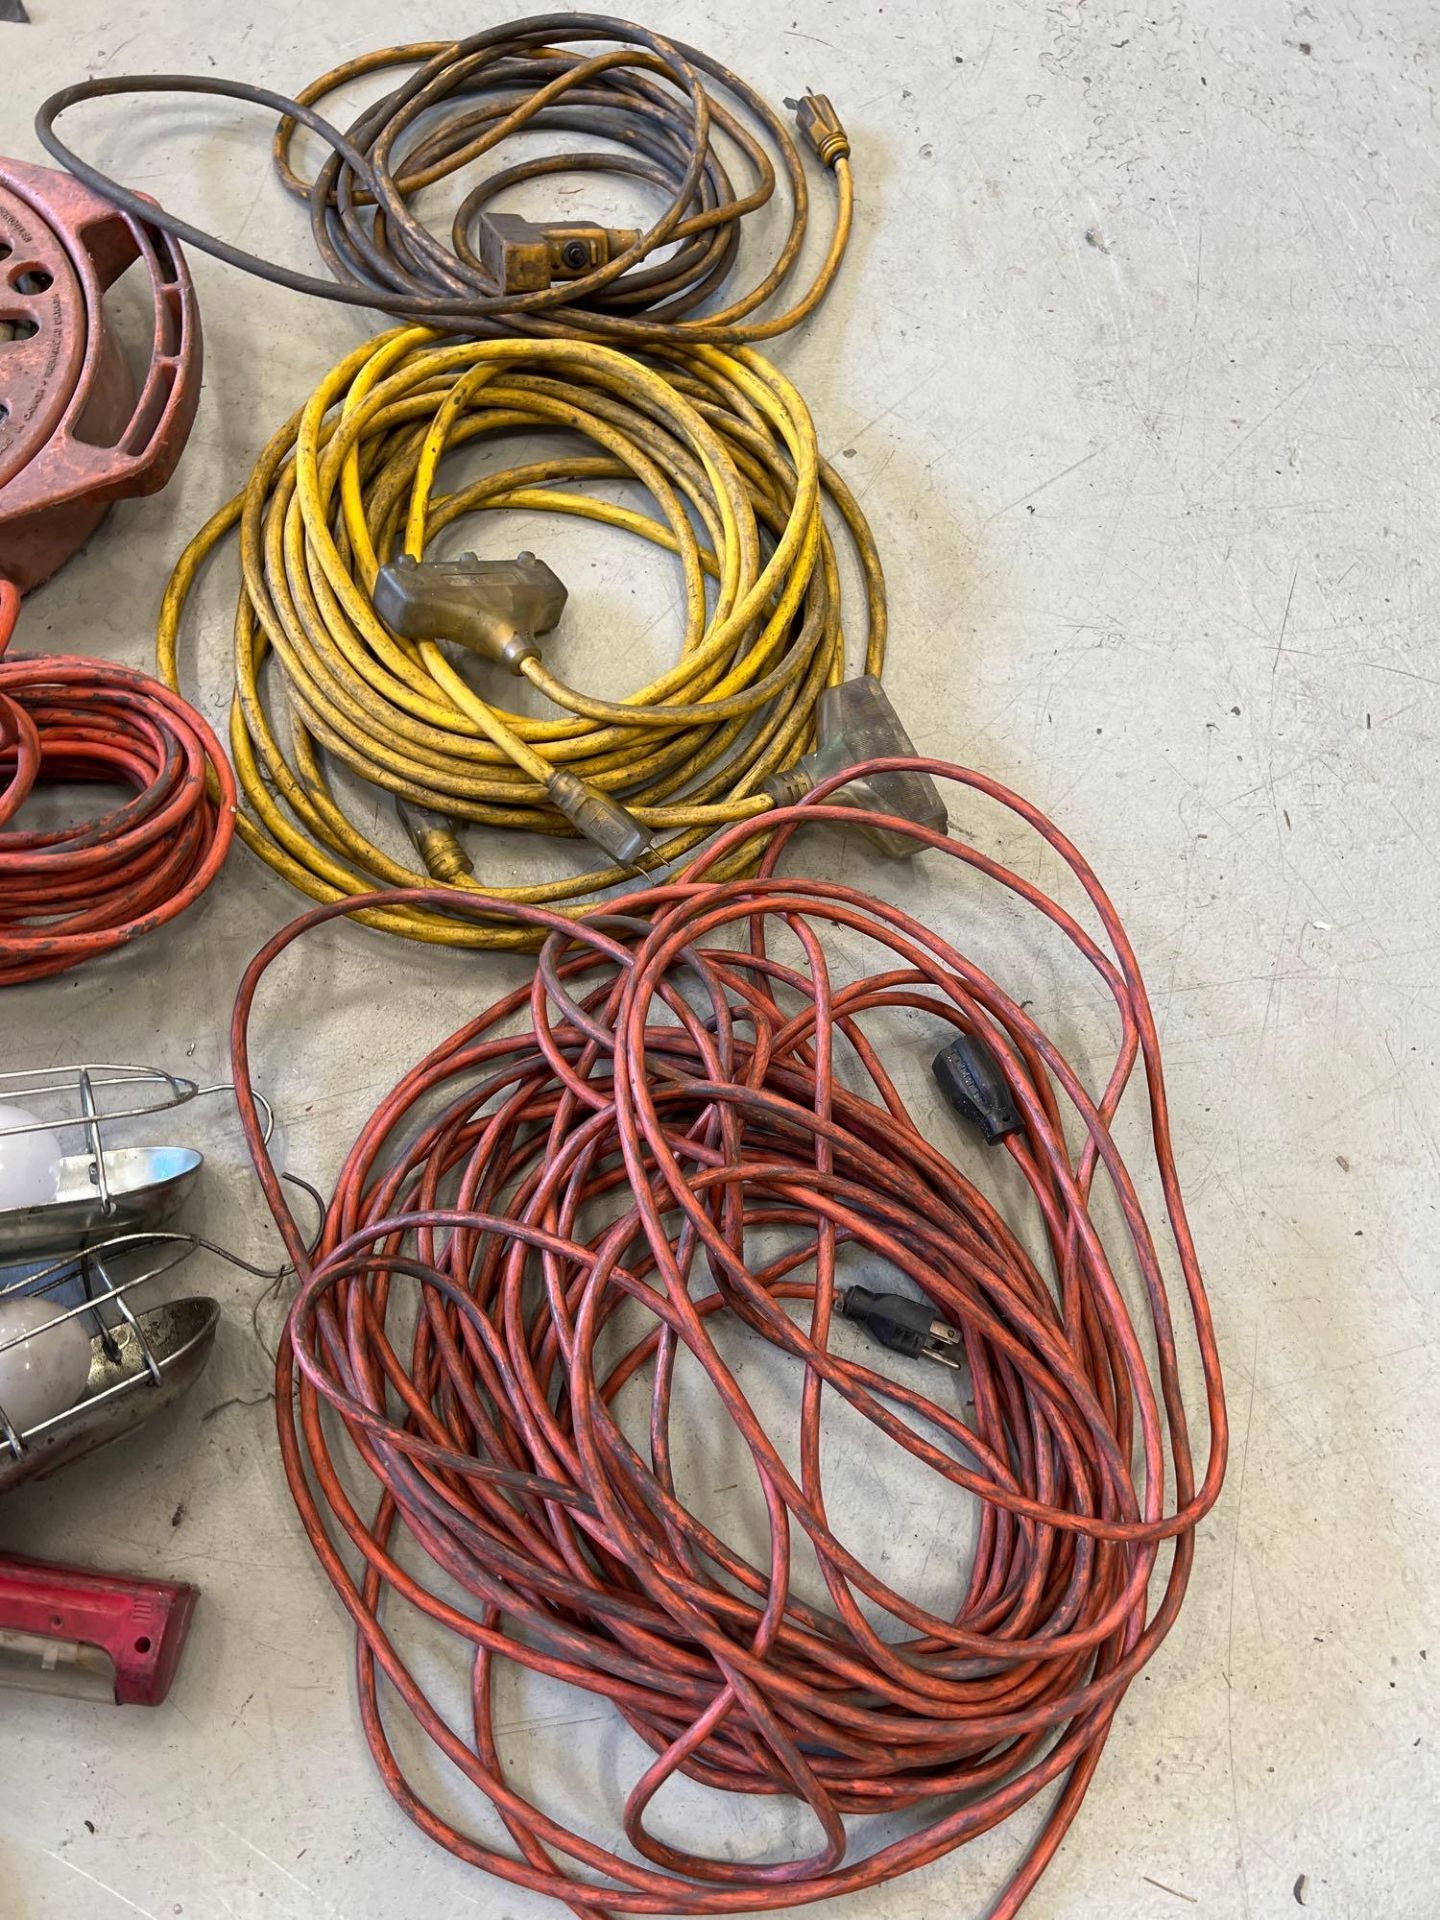 Lot of Misc. Electric Extensions Cords & Work Lights - Image 6 of 6